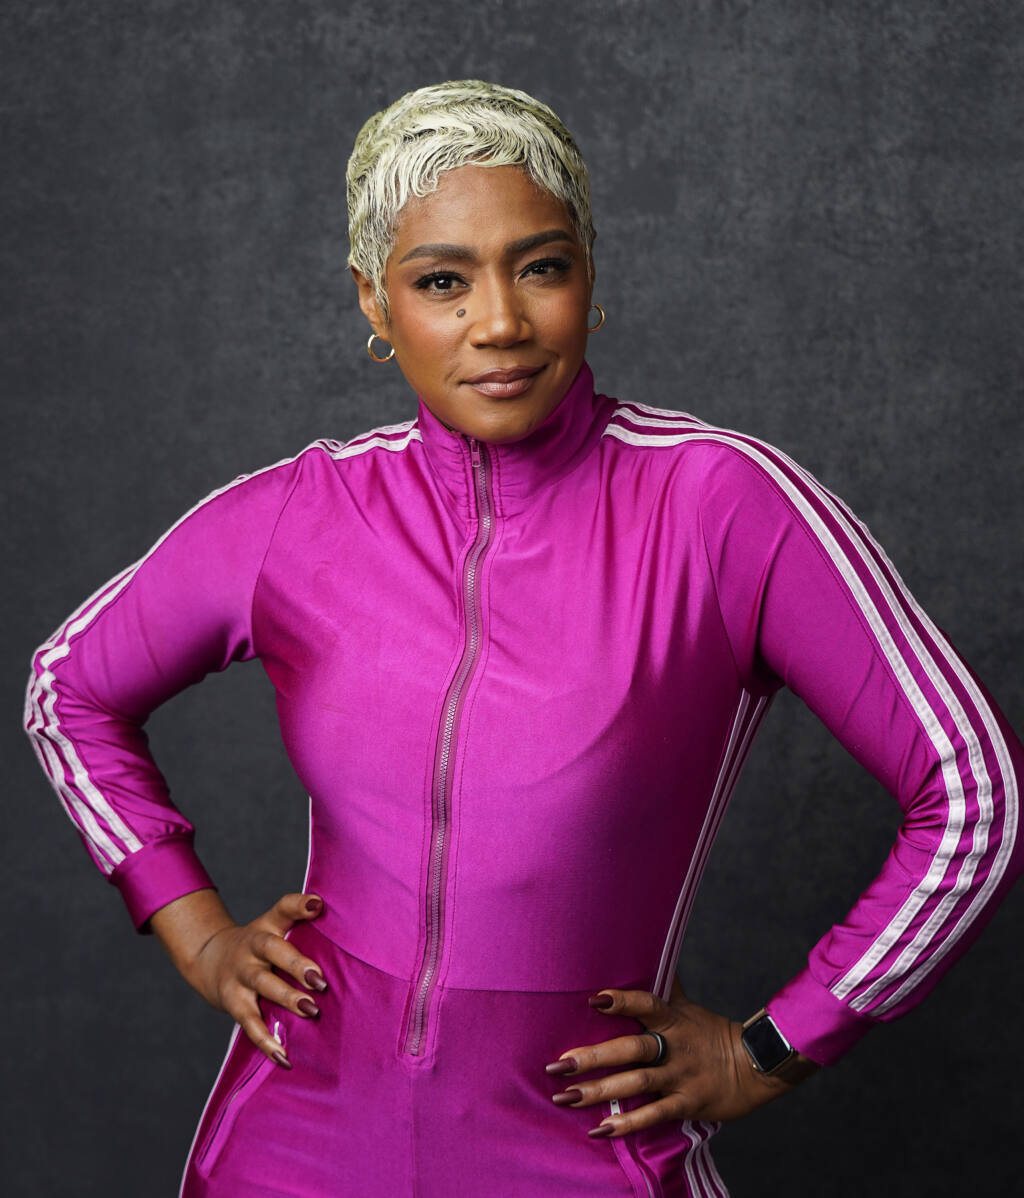 Tiffany Haddish poses for a portrait to promote "Tuca & Bertie" on day three of Comic-Con International on Saturday, July 23, 2022, in San Diego. (AP Photo/Chris Pizzello)